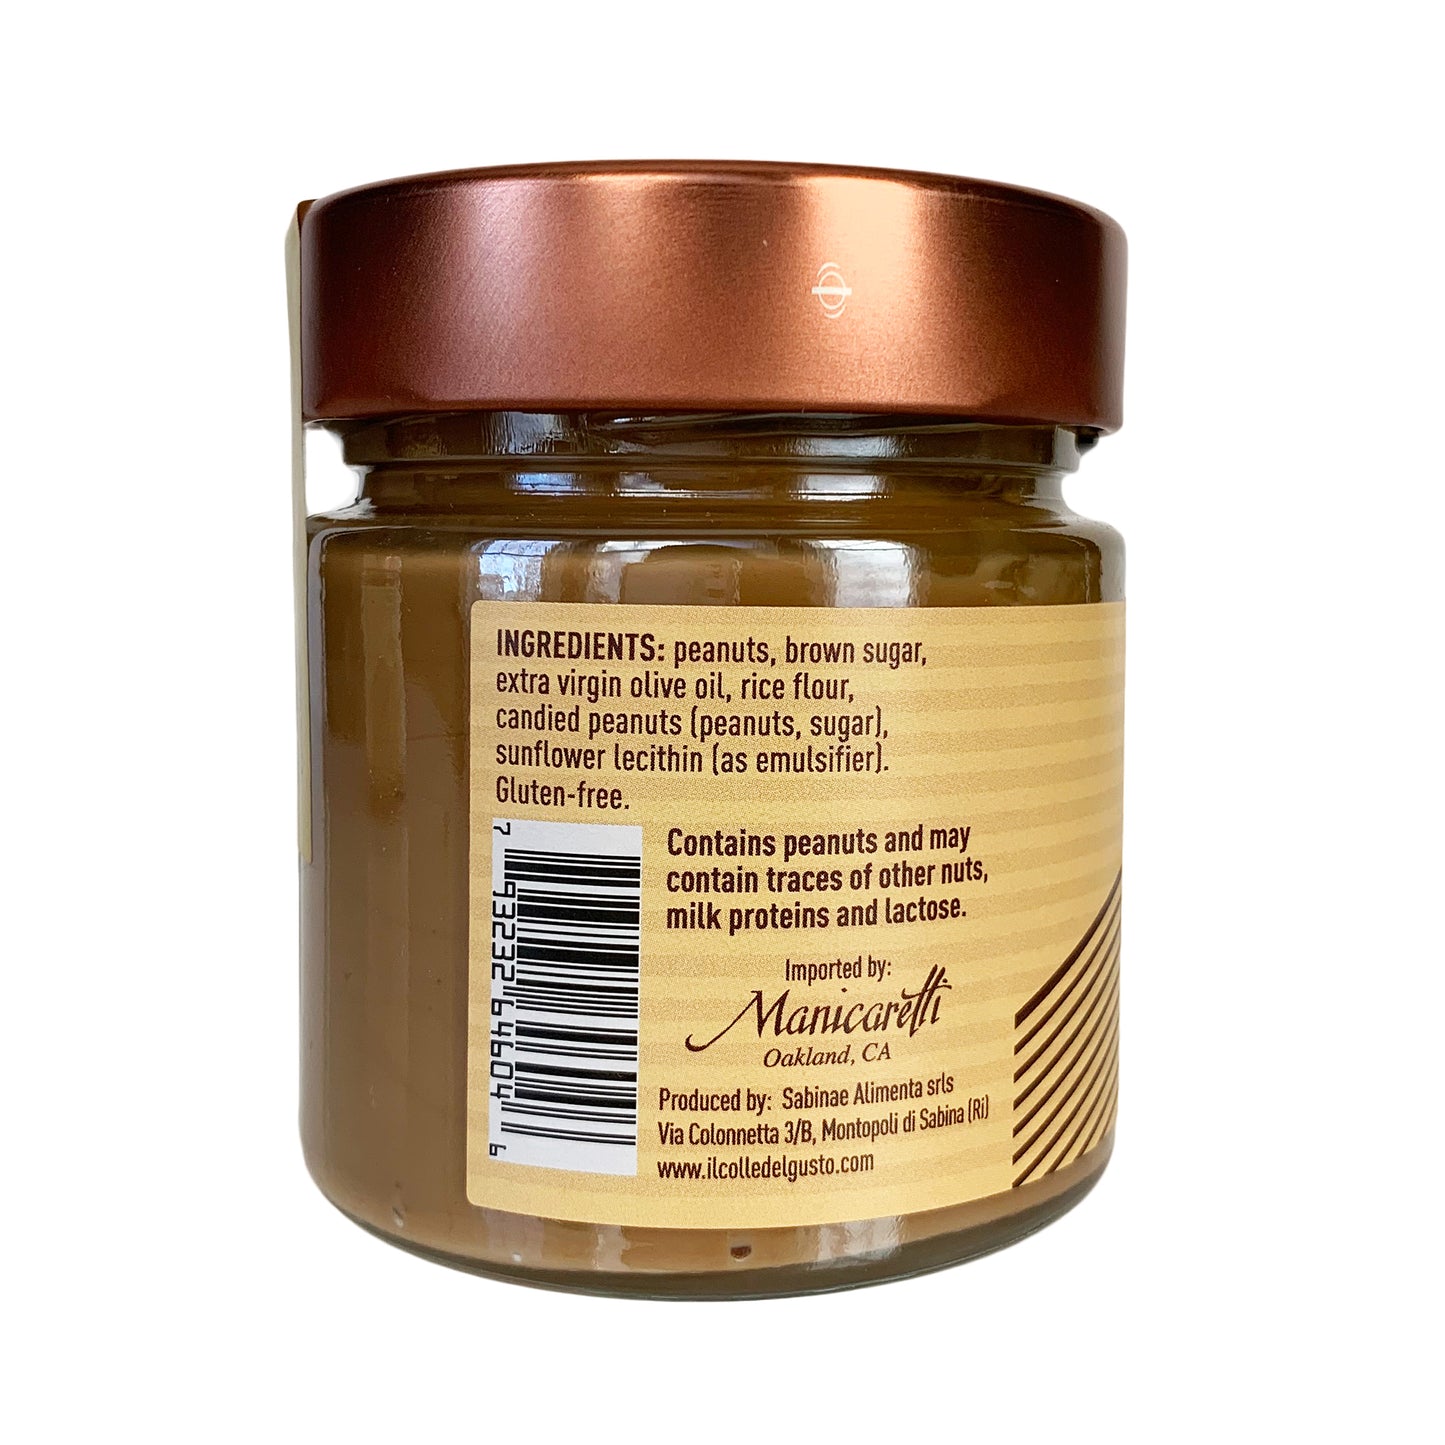 Il Colle del Gusto Sweet and Crunchy Peanut Butter Spread (Arachidella) with Extra Virgin Olive Oil 8.8 Ounce